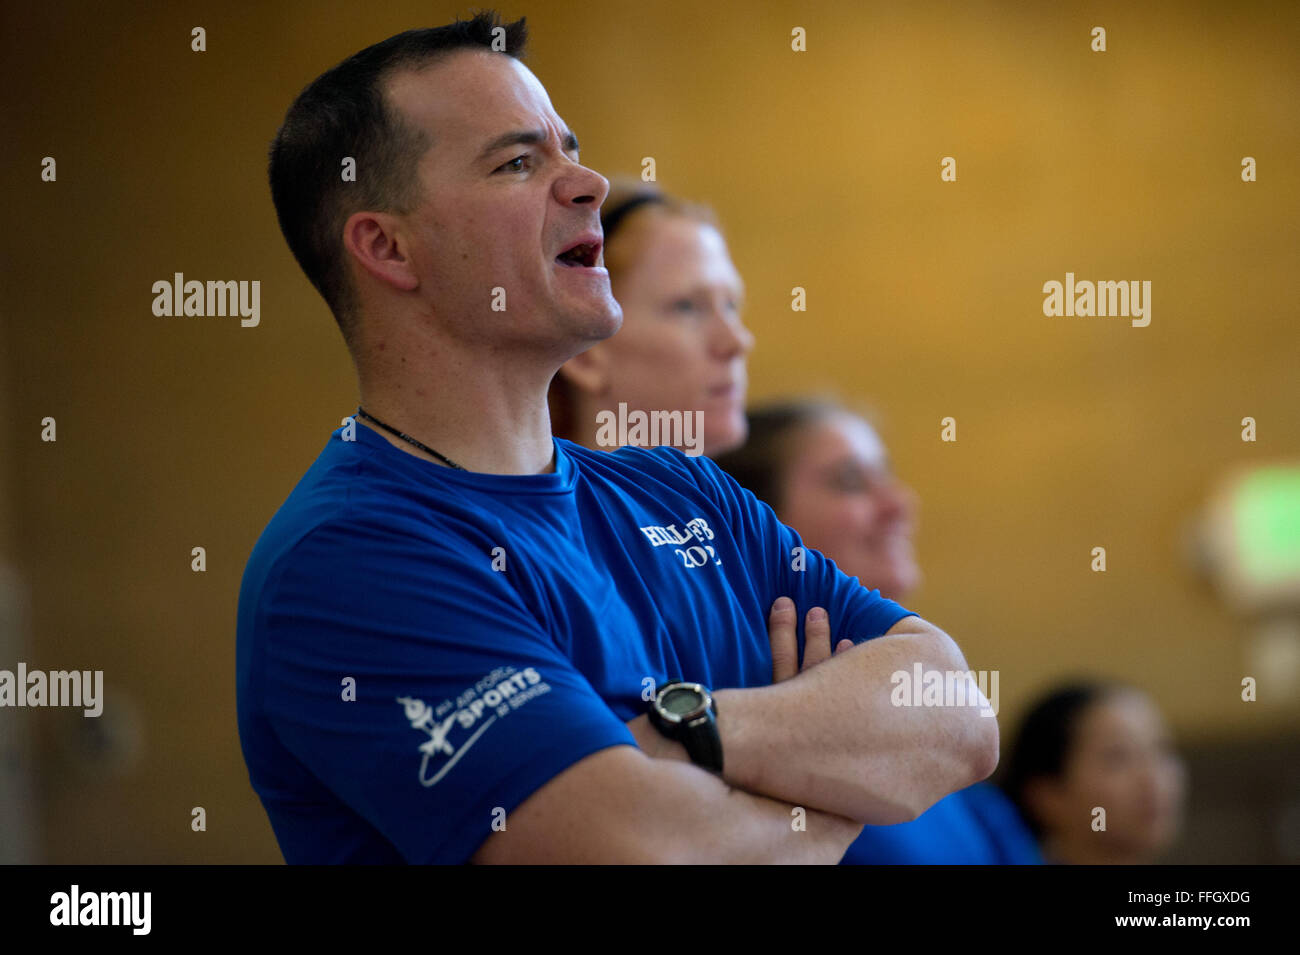 Senior Master Sgt. Jeffrey Barrows, assigned to the 124th Fighter Wing at Gowen Field, Idaho, yells out plays during a scrimmage against the Utah State University varsity volleyball team at Hill Air Force Base, Utah. Barrows is in his third year as the Air Force Women’s Volleyball team's head coach. Stock Photo